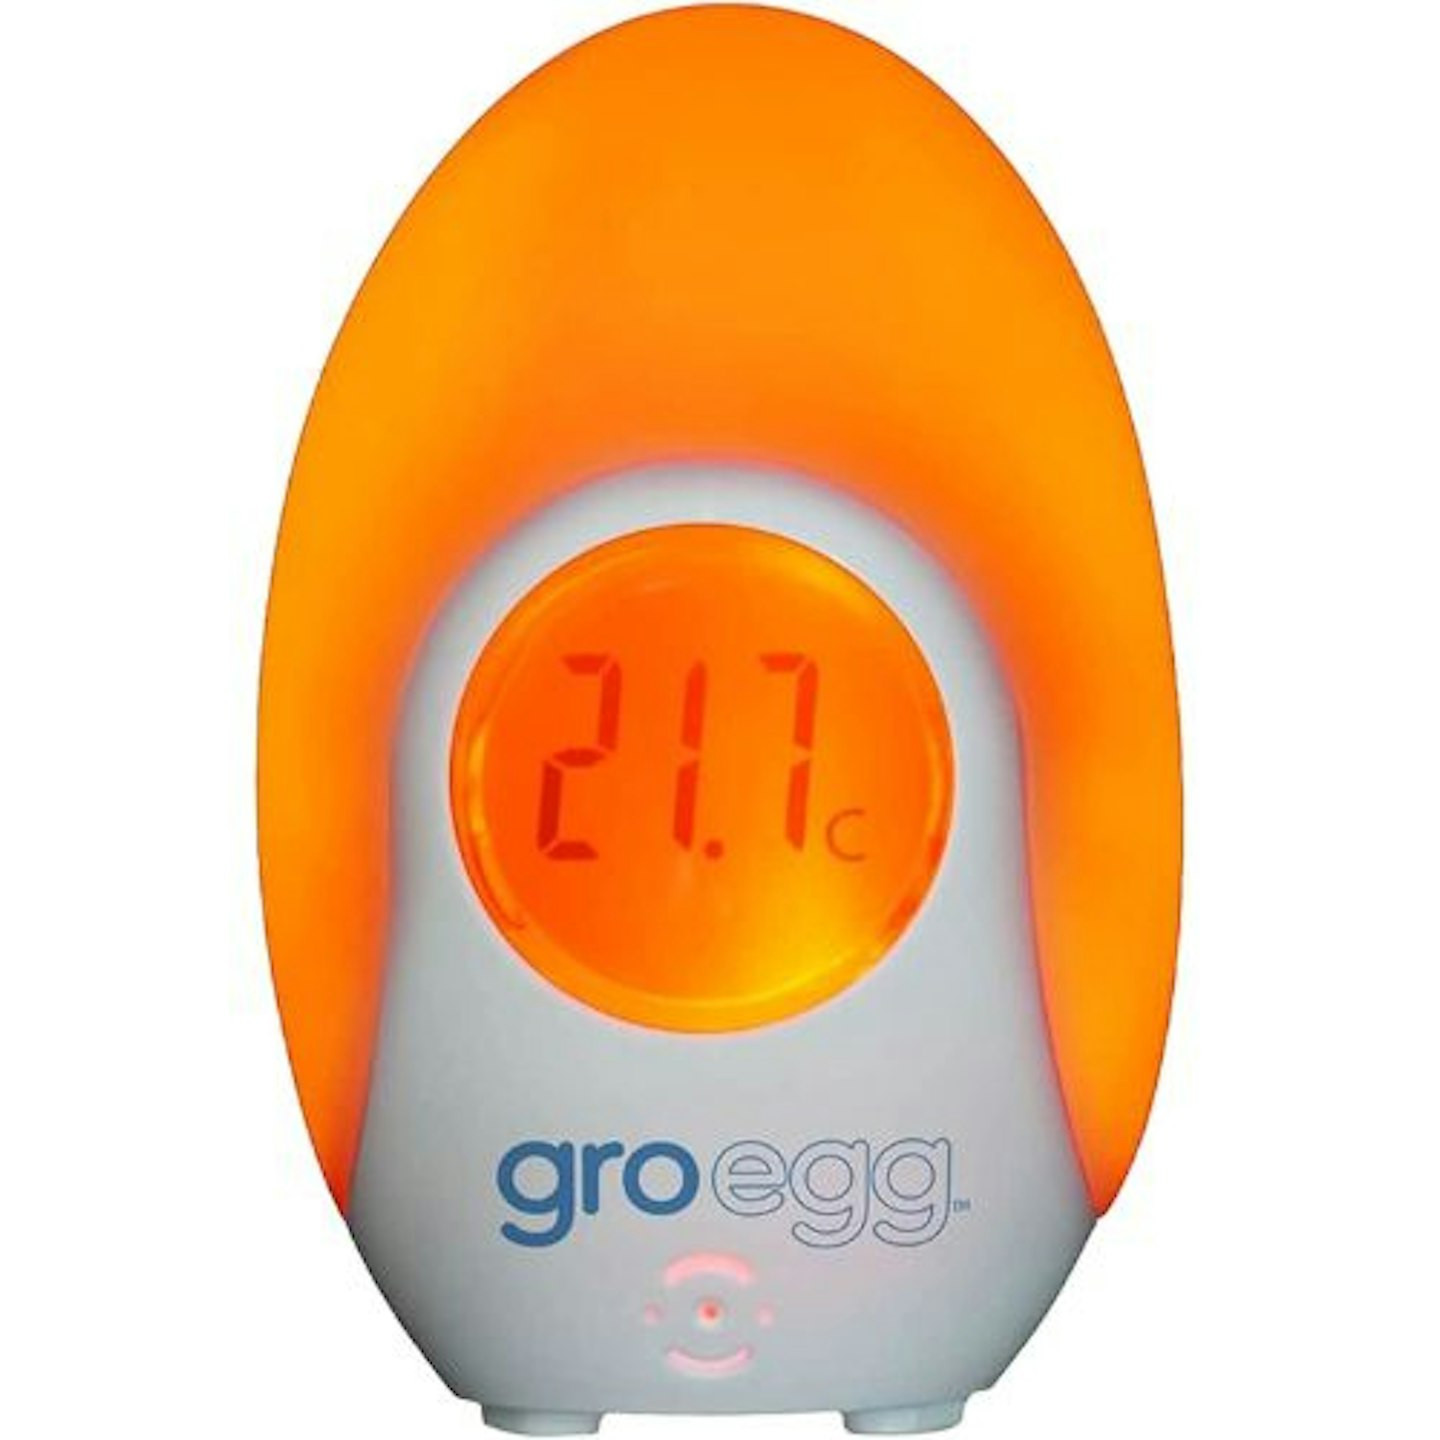 The best baby room thermometer